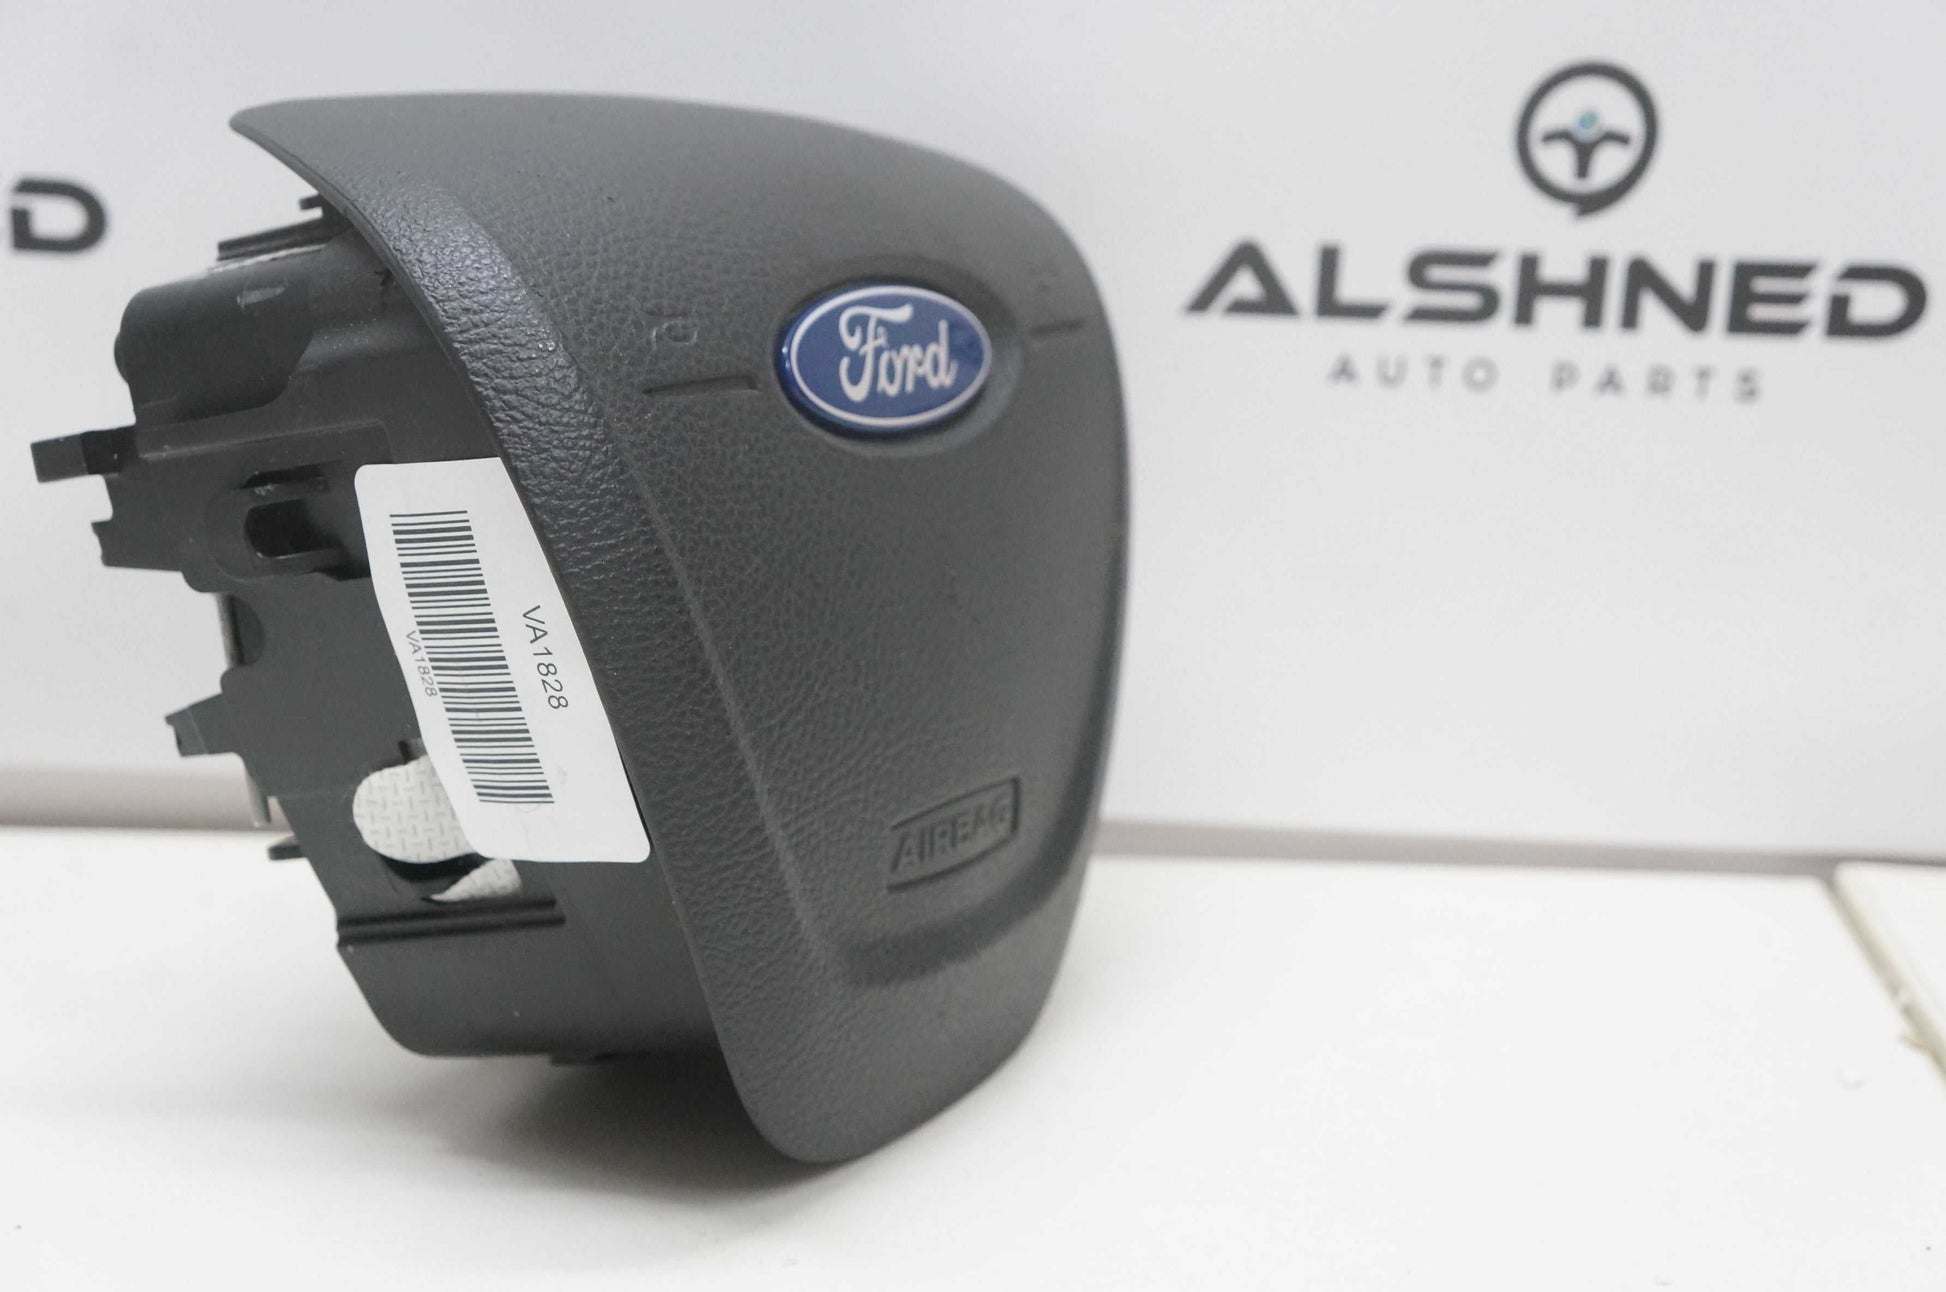 2014-2018 Ford Transit Connect Front Left Driver Side Steering Wheel Airbag OEM DT11-17042B85-AA Alshned Auto Parts